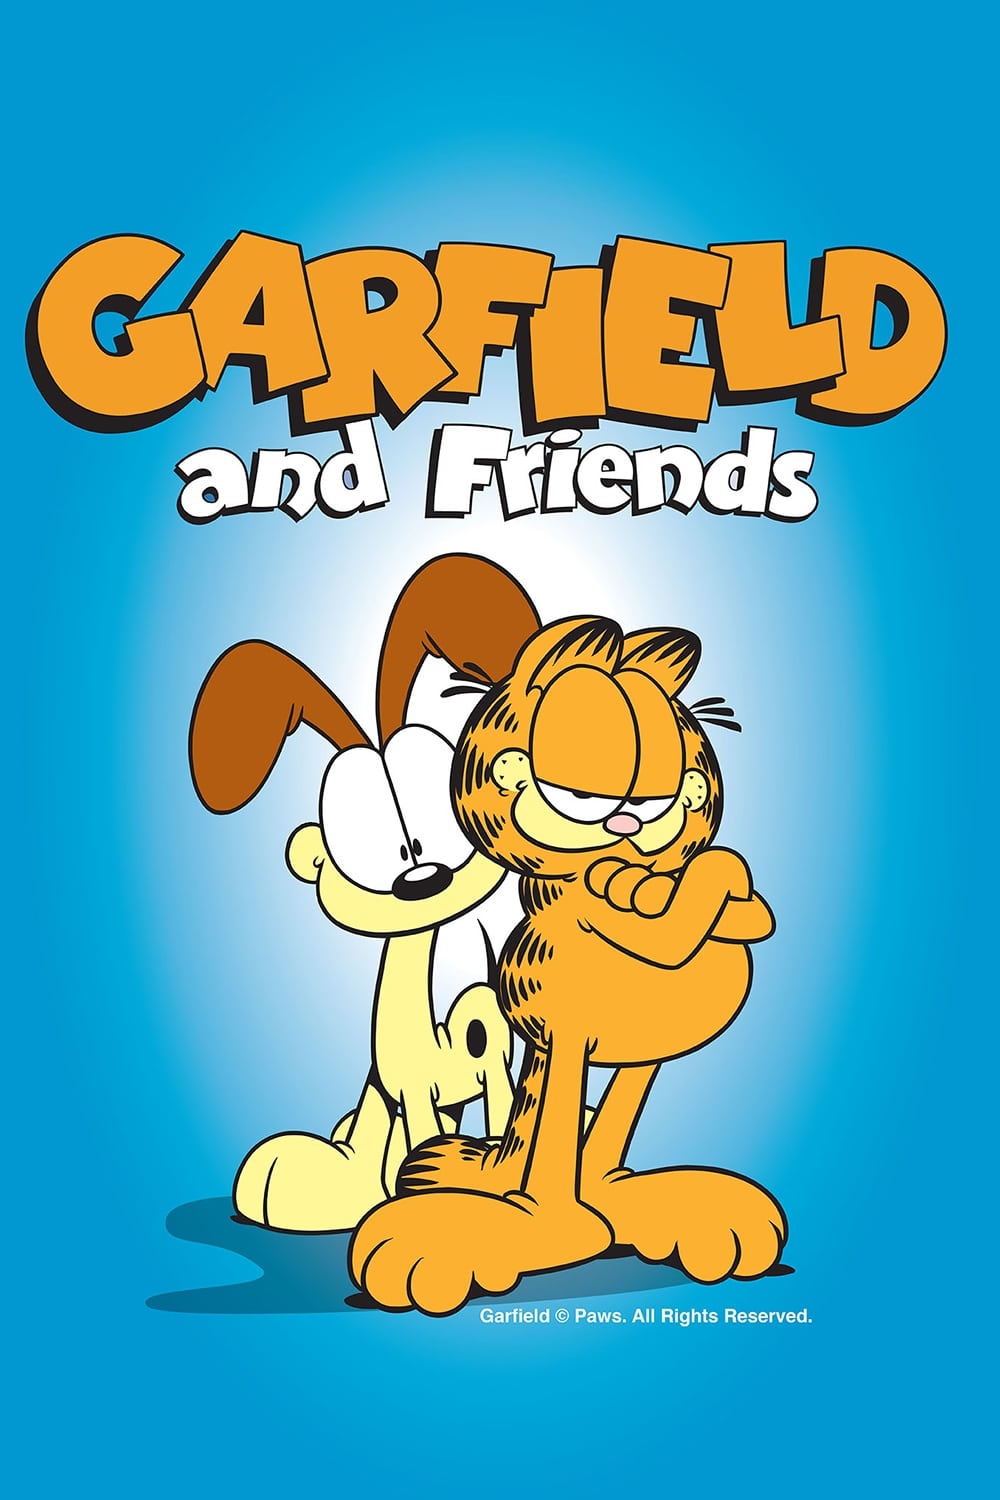 Garfield and Friends (1988)